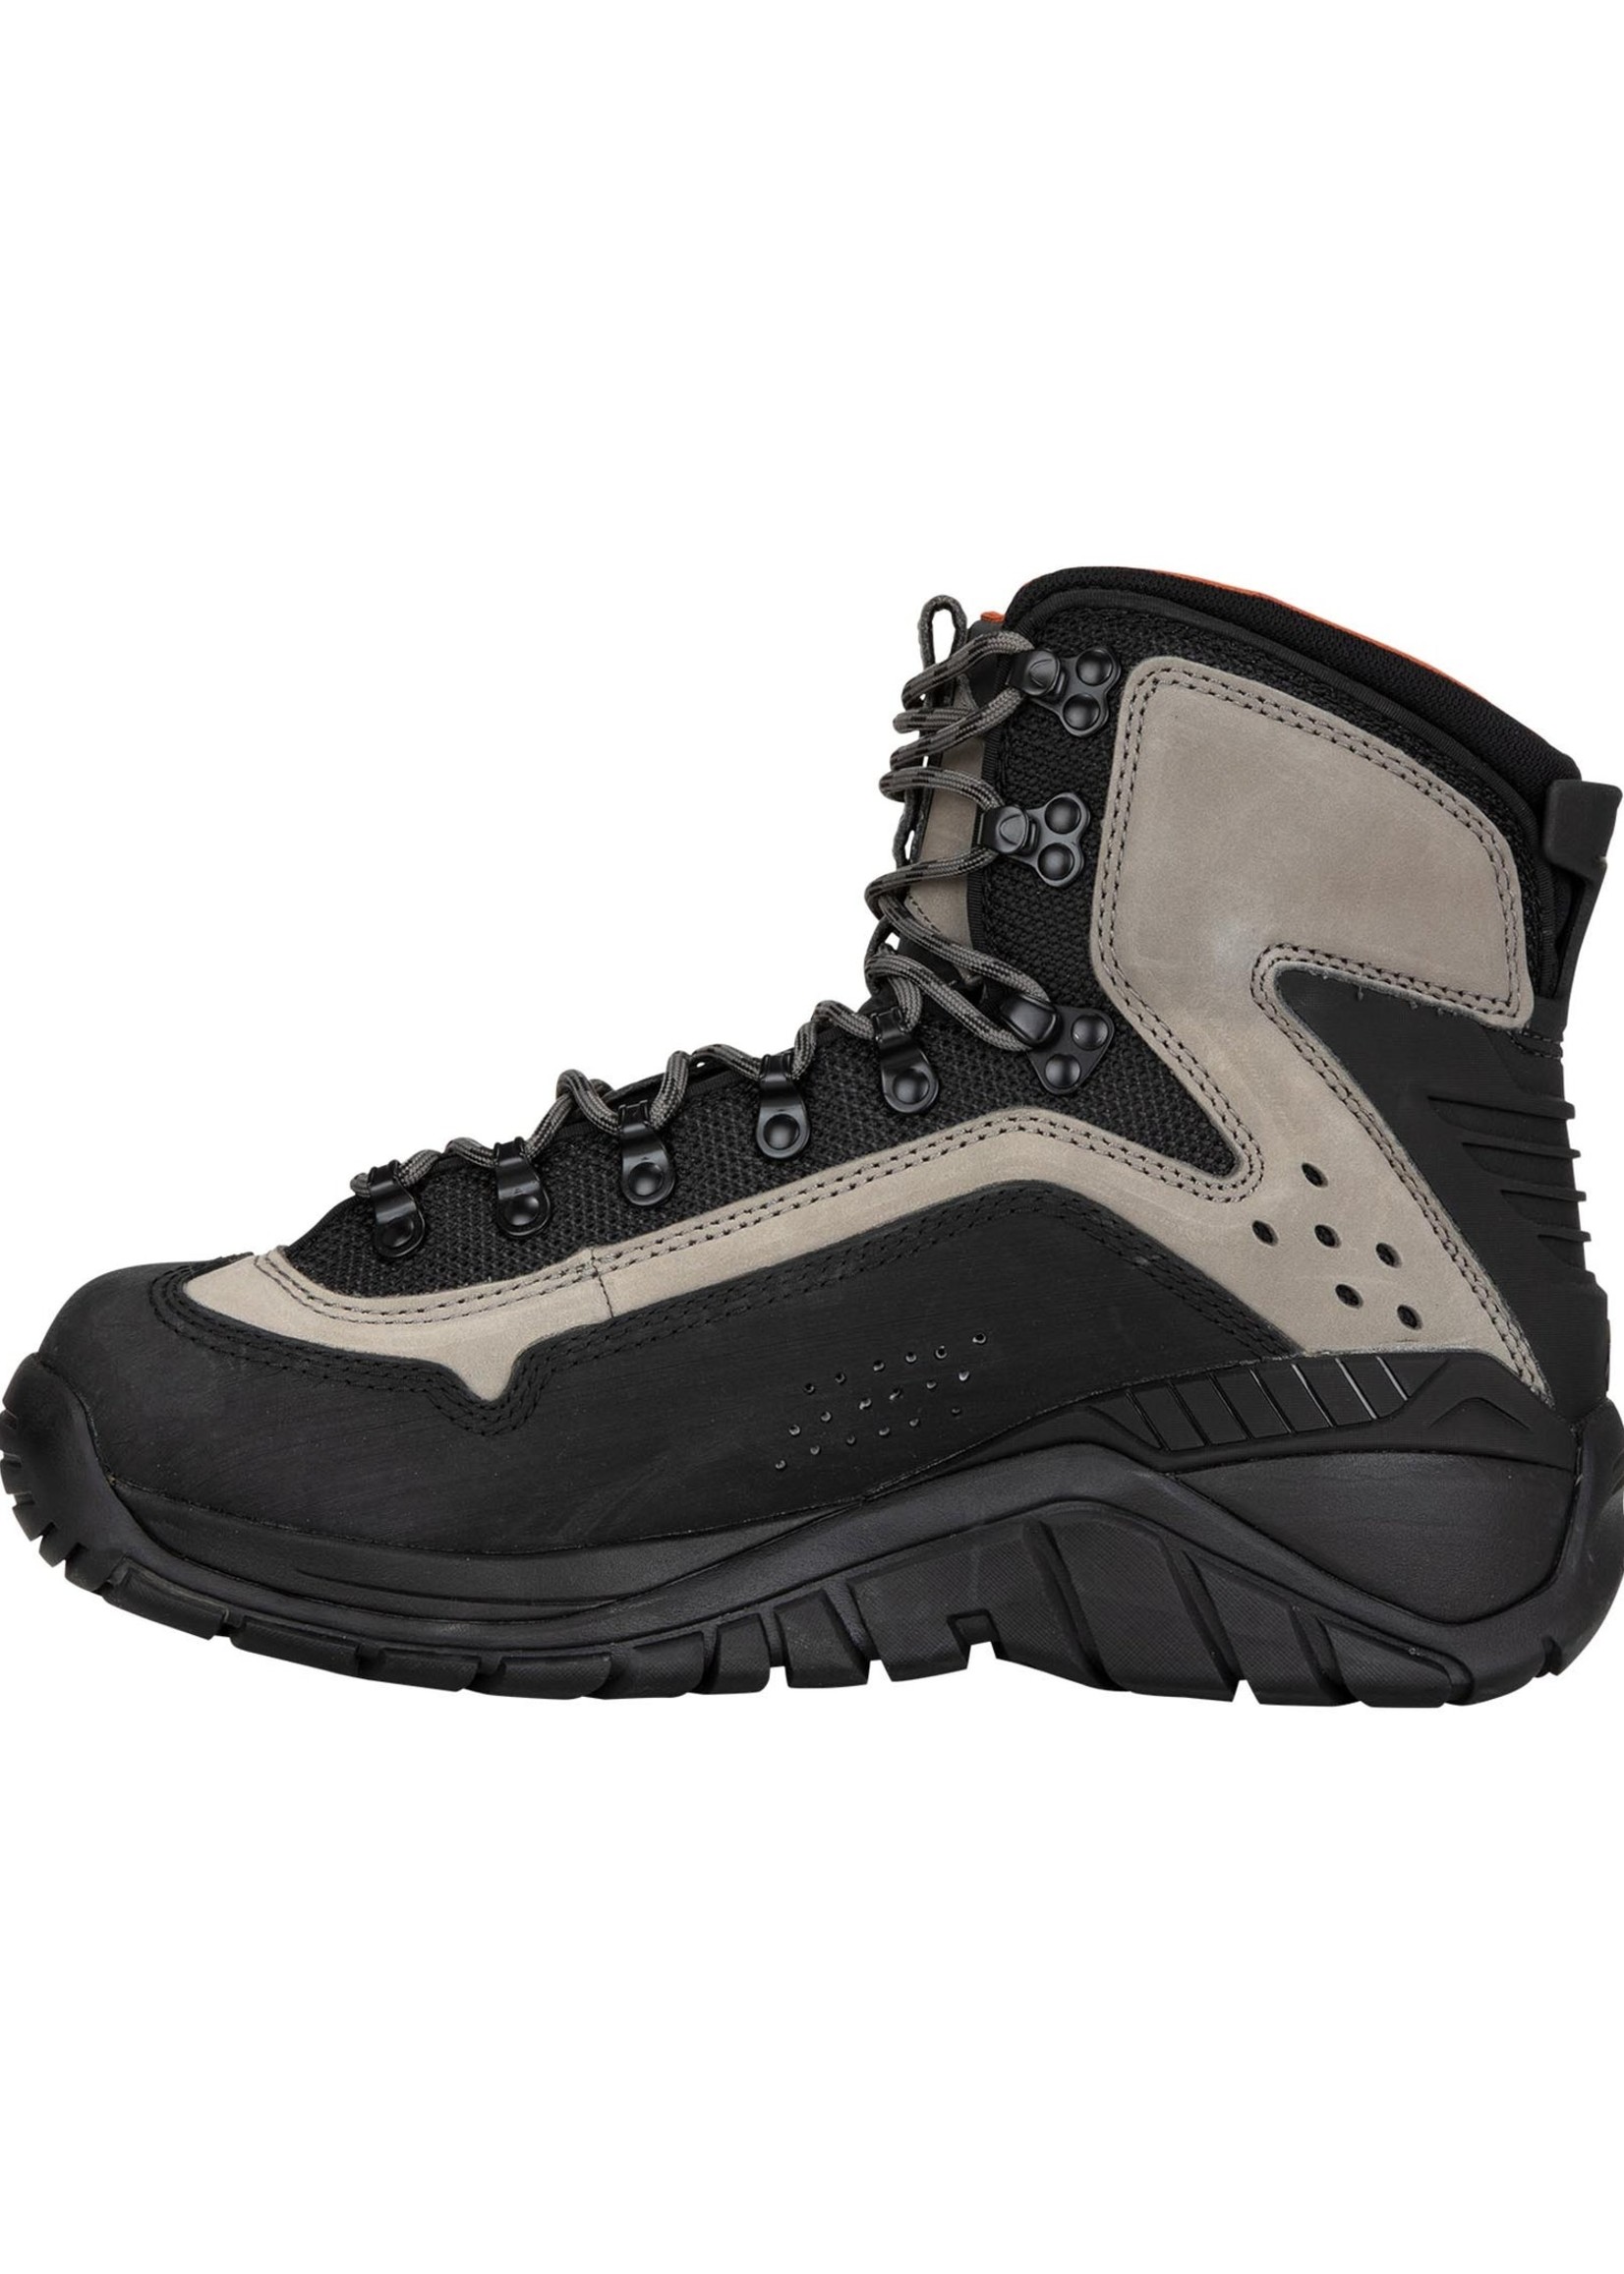 SIMMS M's G3 Guide Wading Boots - Vibram Soles